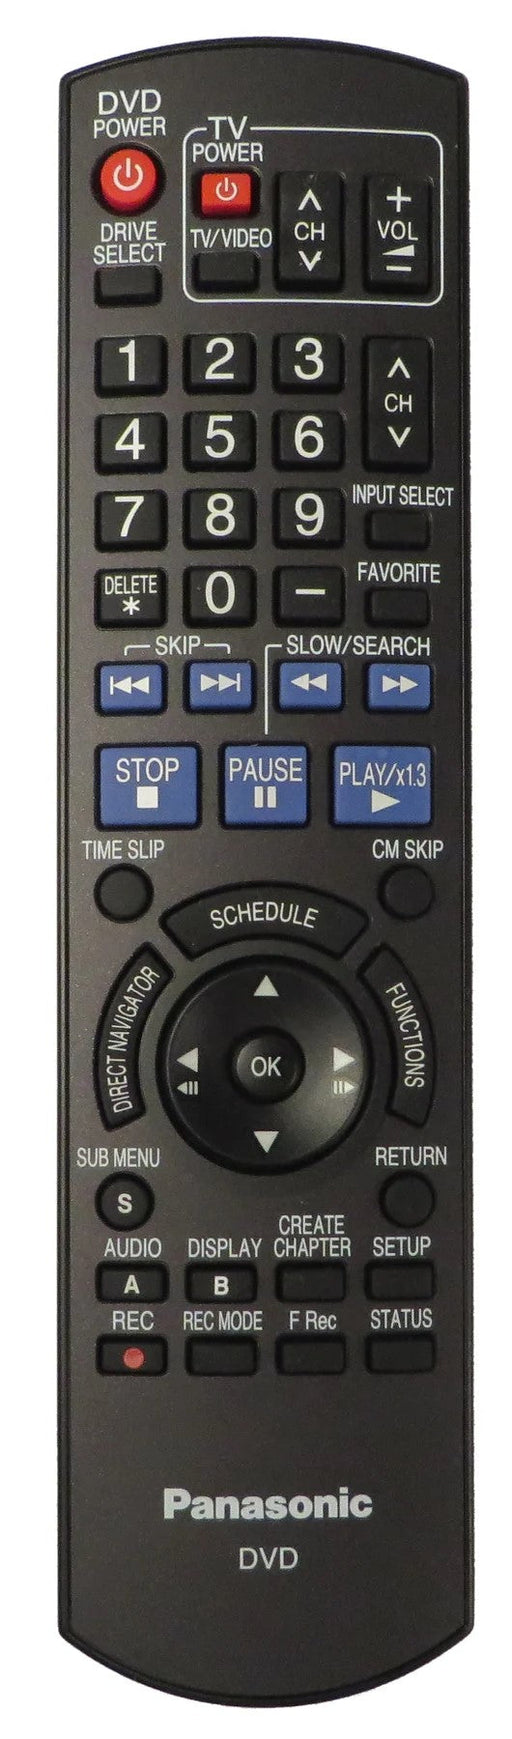 Panasonic N2QAYB000196 Remote Control for DVD Recorder DMR-EZ28K And More-Remote Controls-SpenCertified-vintage-refurbished-electronics